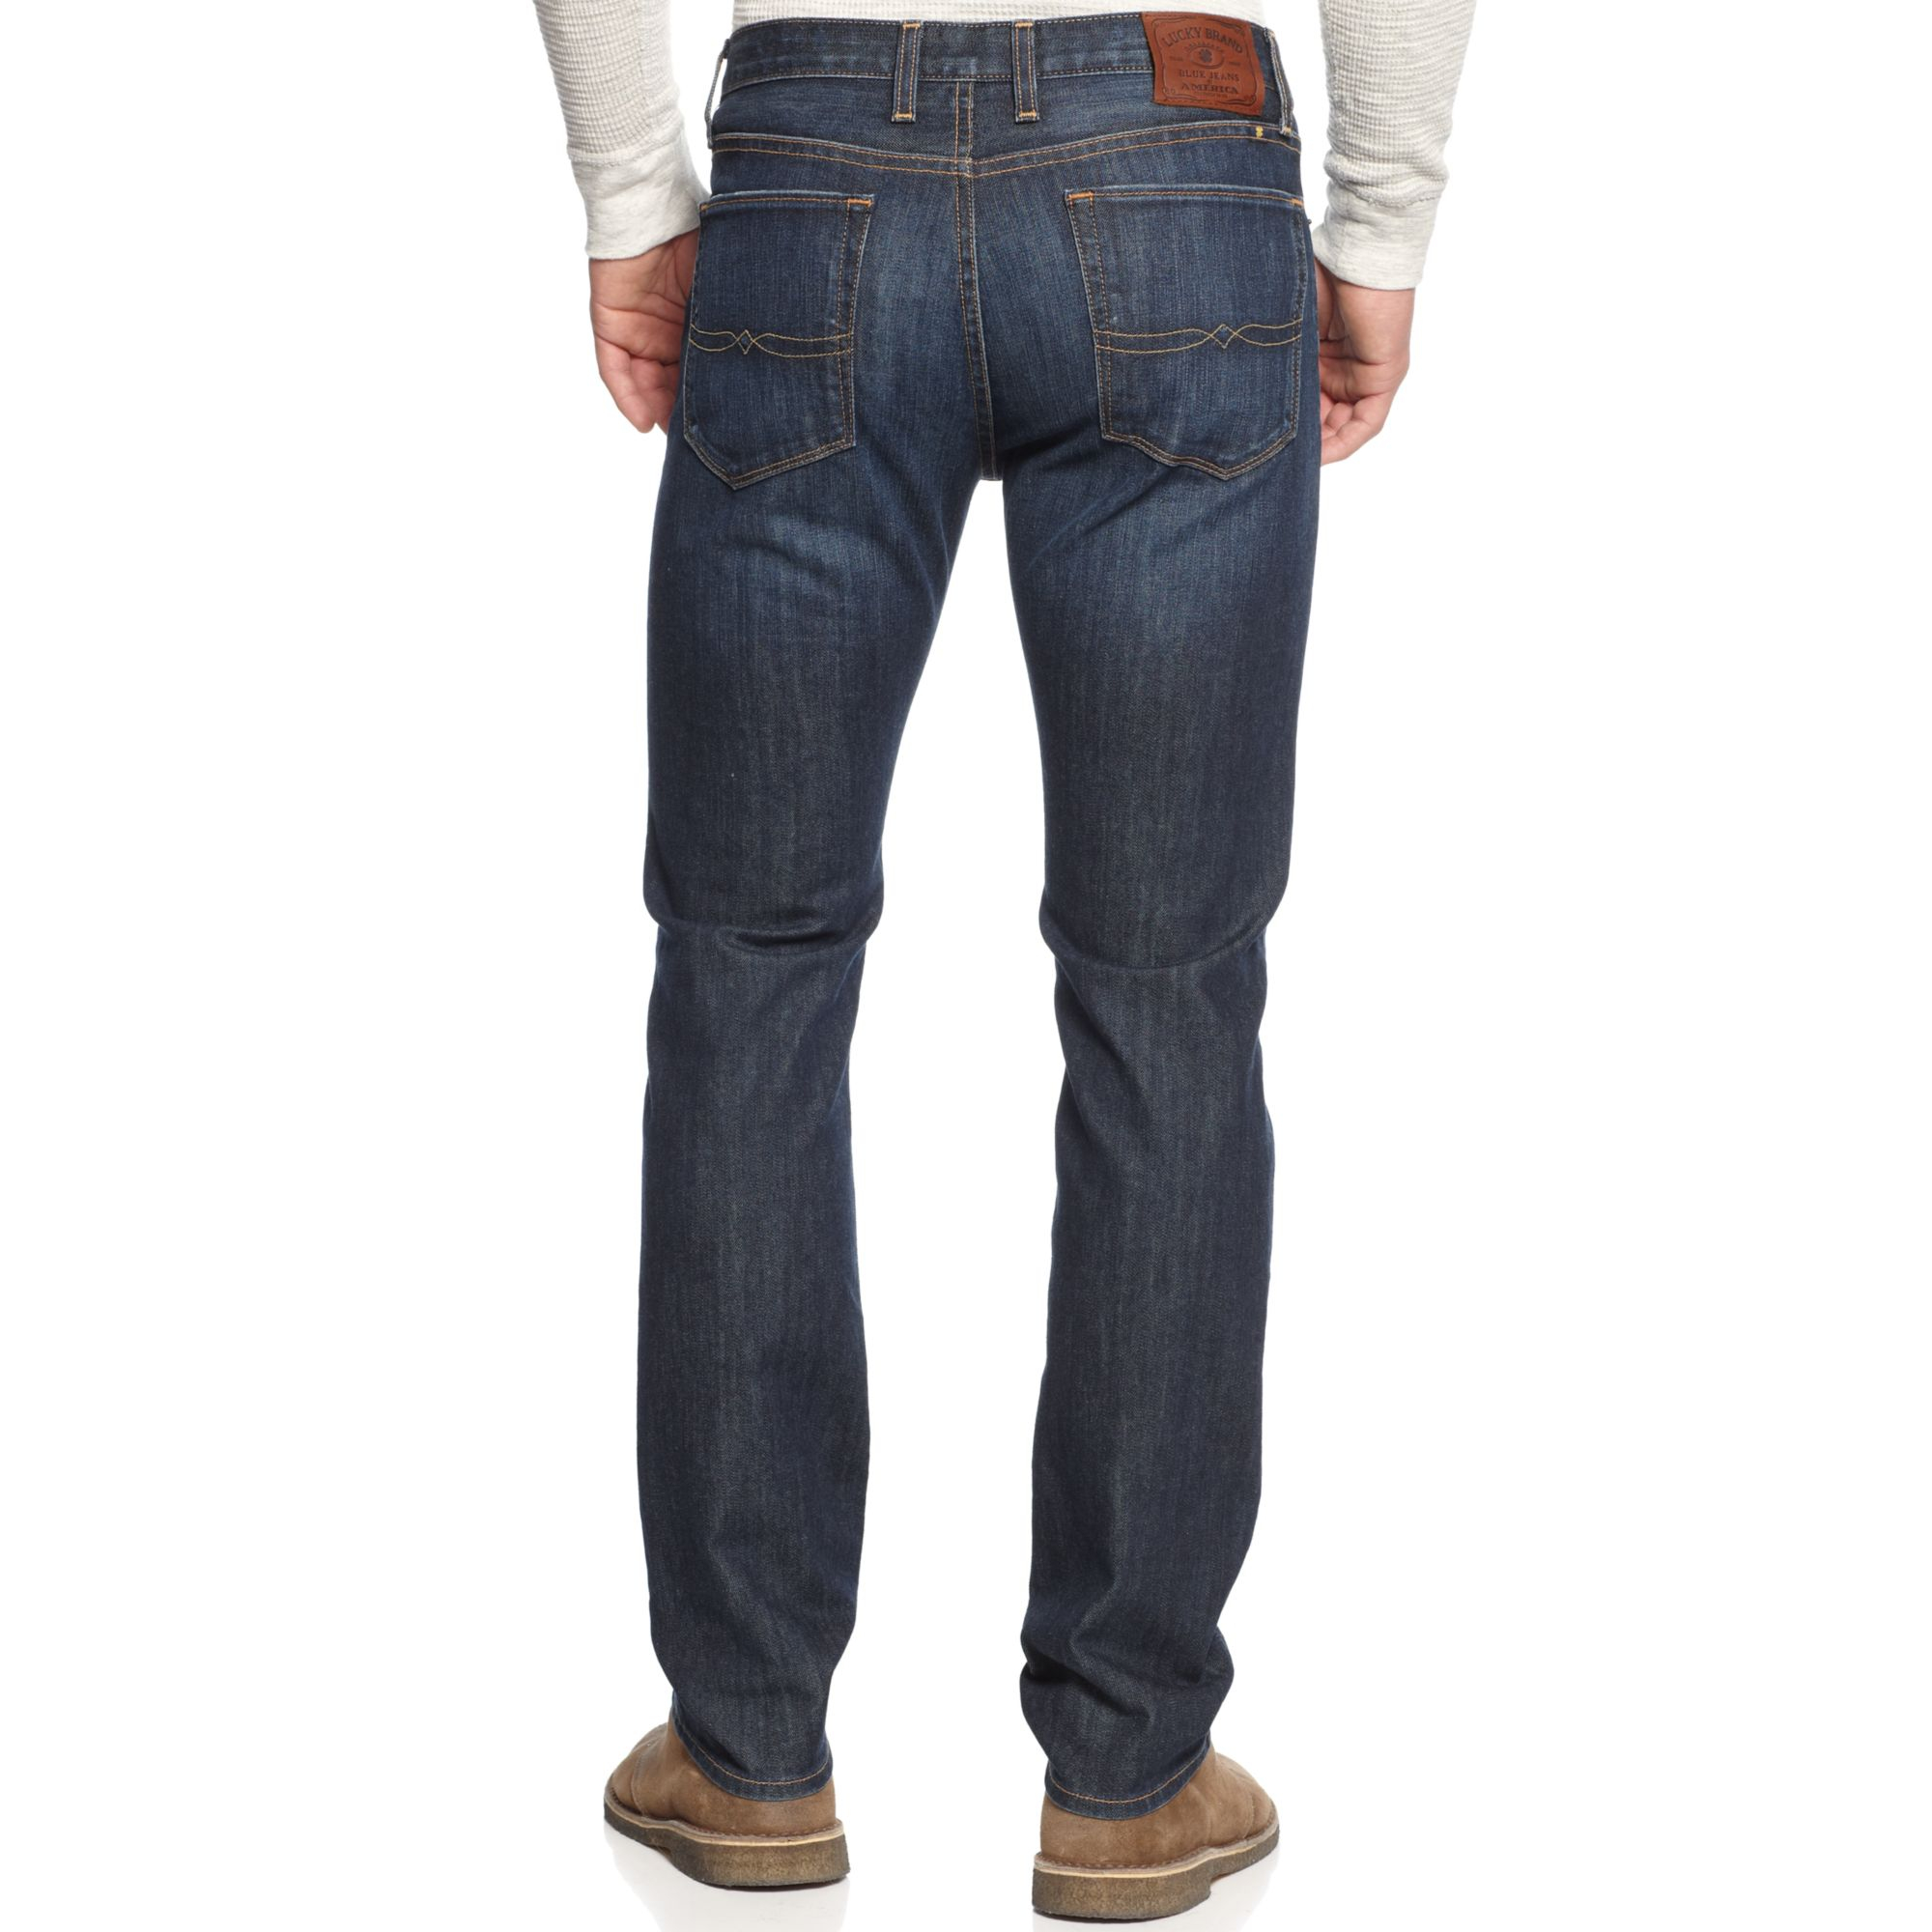 Lyst - Lucky Brand Authentic Skinny Jeans in Blue for Men